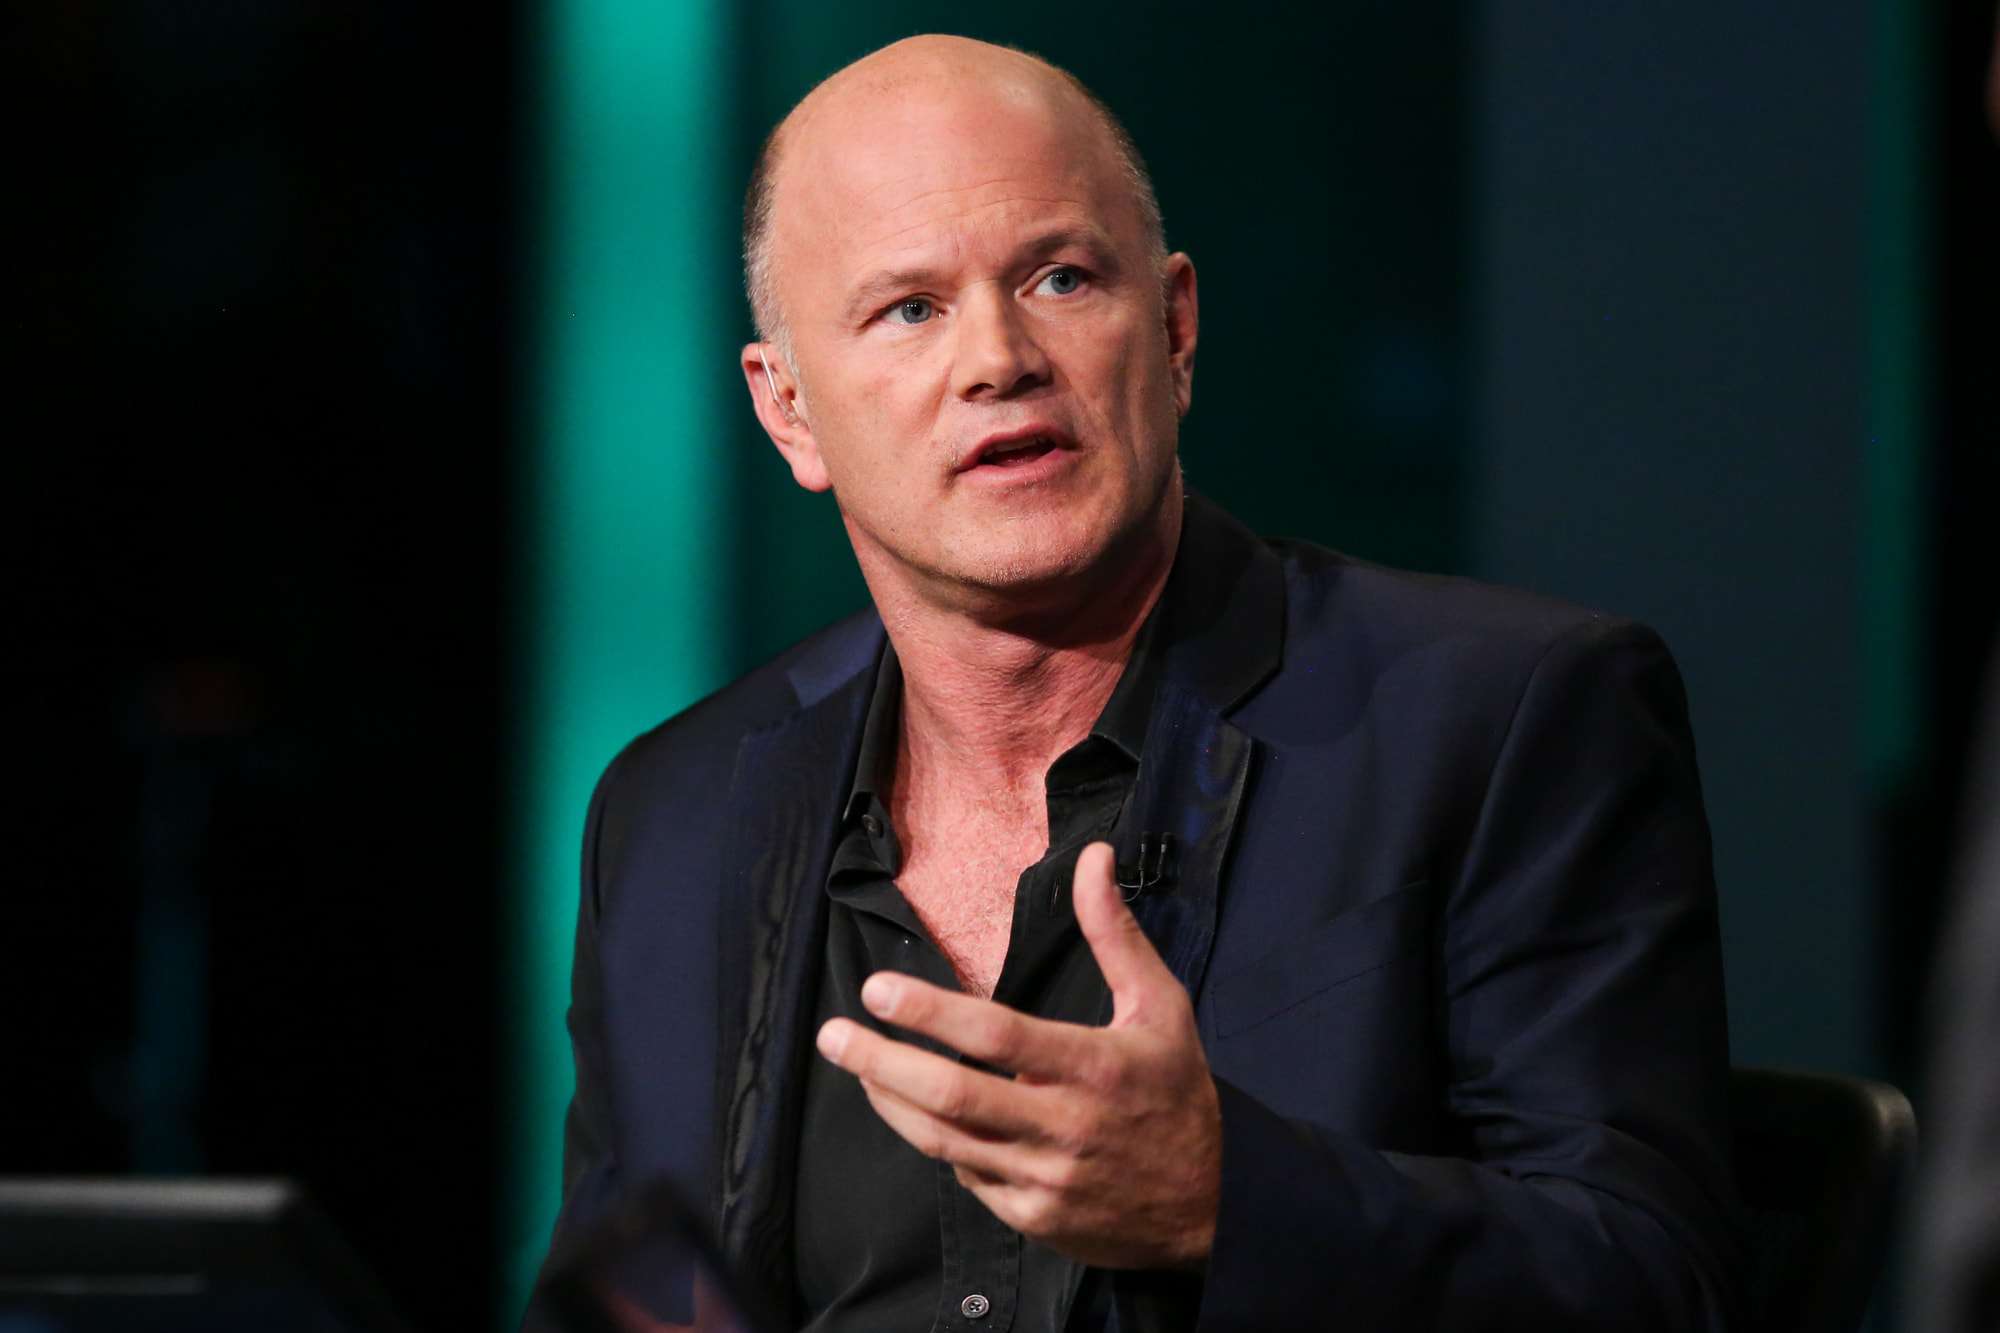 When Bitcoin Hits $100,000 Mike Novogratz Will Donate Most of His Profits to Charity